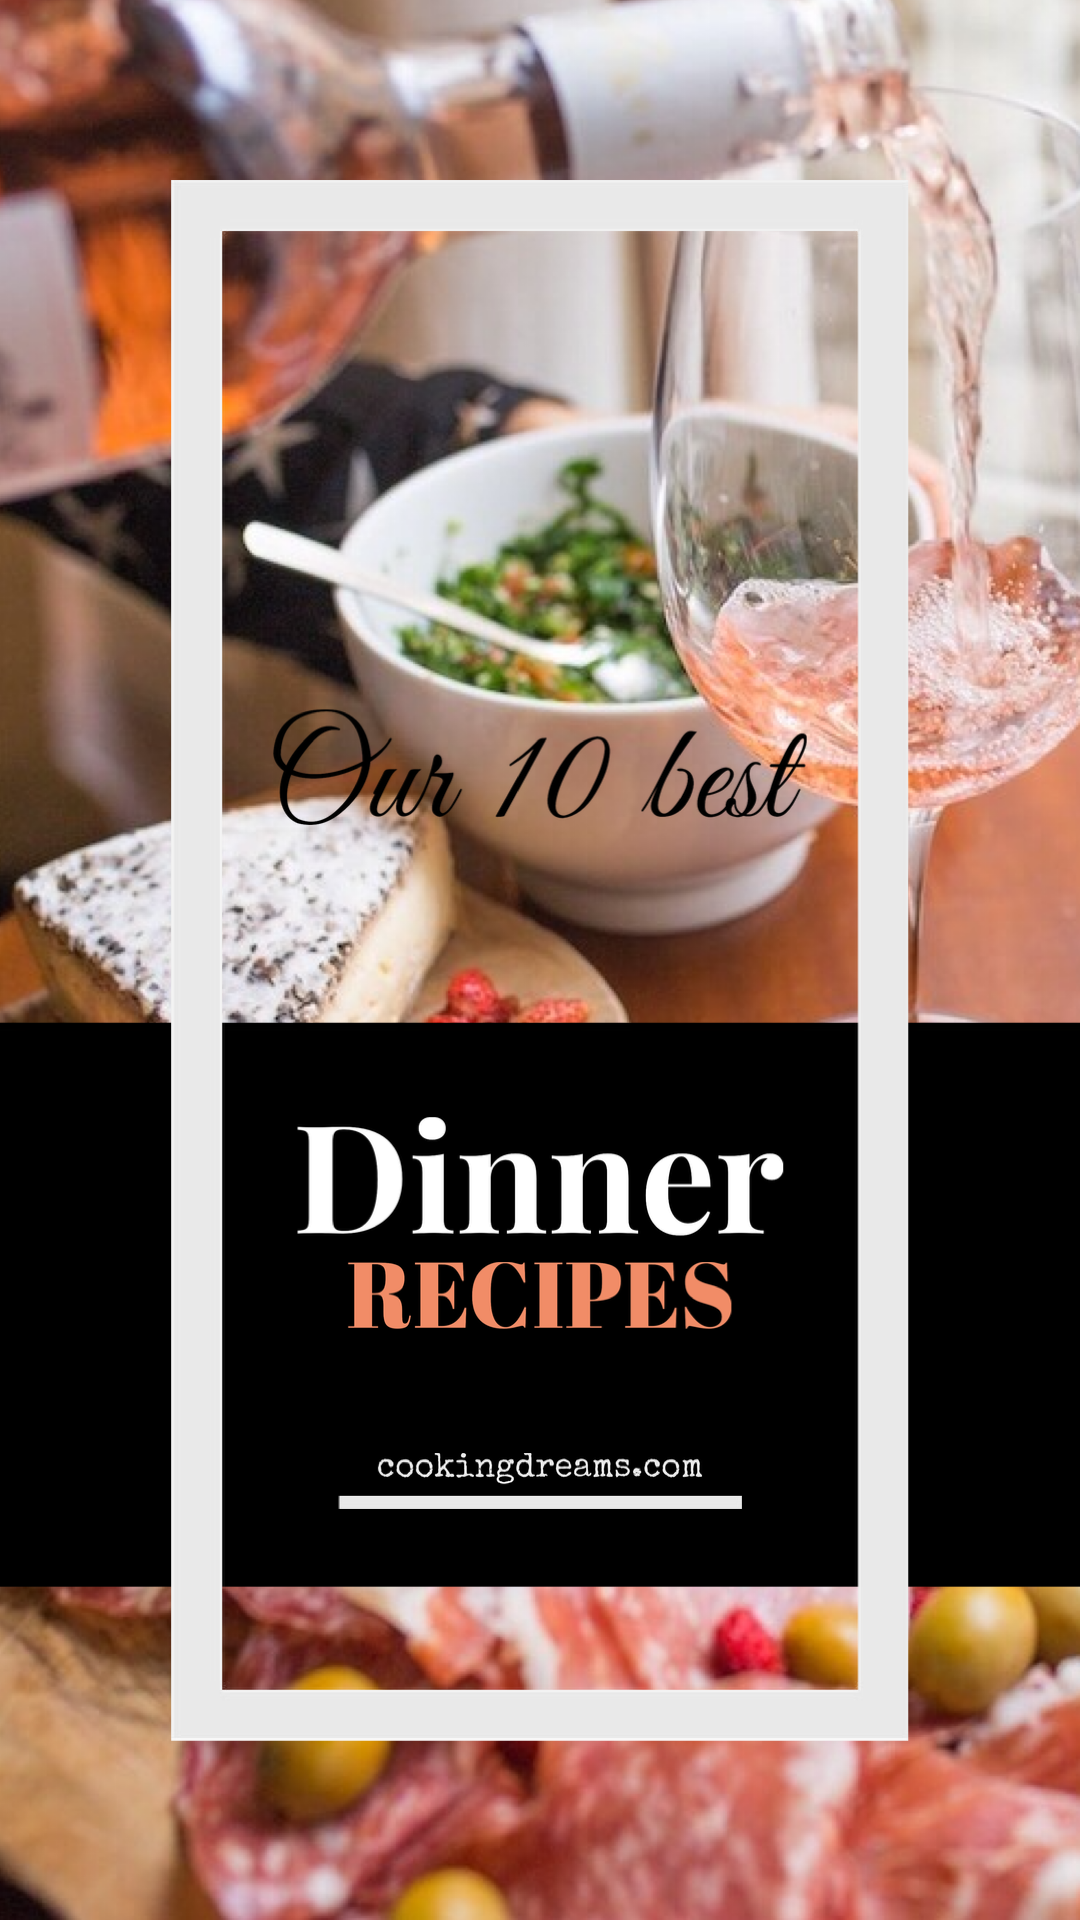 Dinner Recipes. A Plate Of Food And A Glass Of Wine On A Table Template